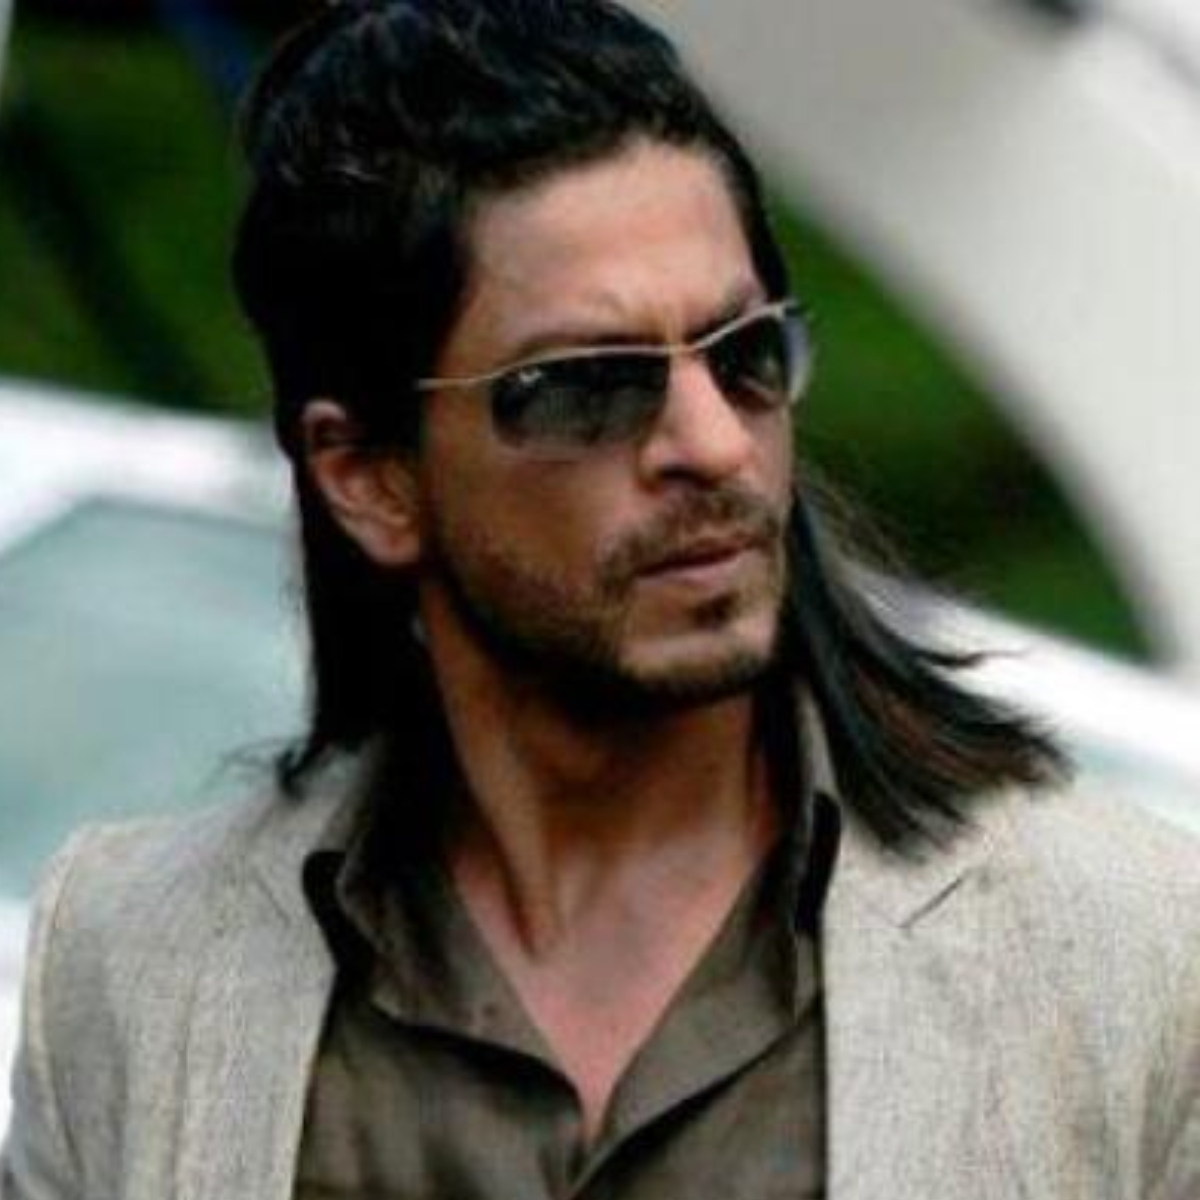 EXCLUSIVE: Shah Rukh Khan to sport long hair ala Don 2 style for his next Pathan